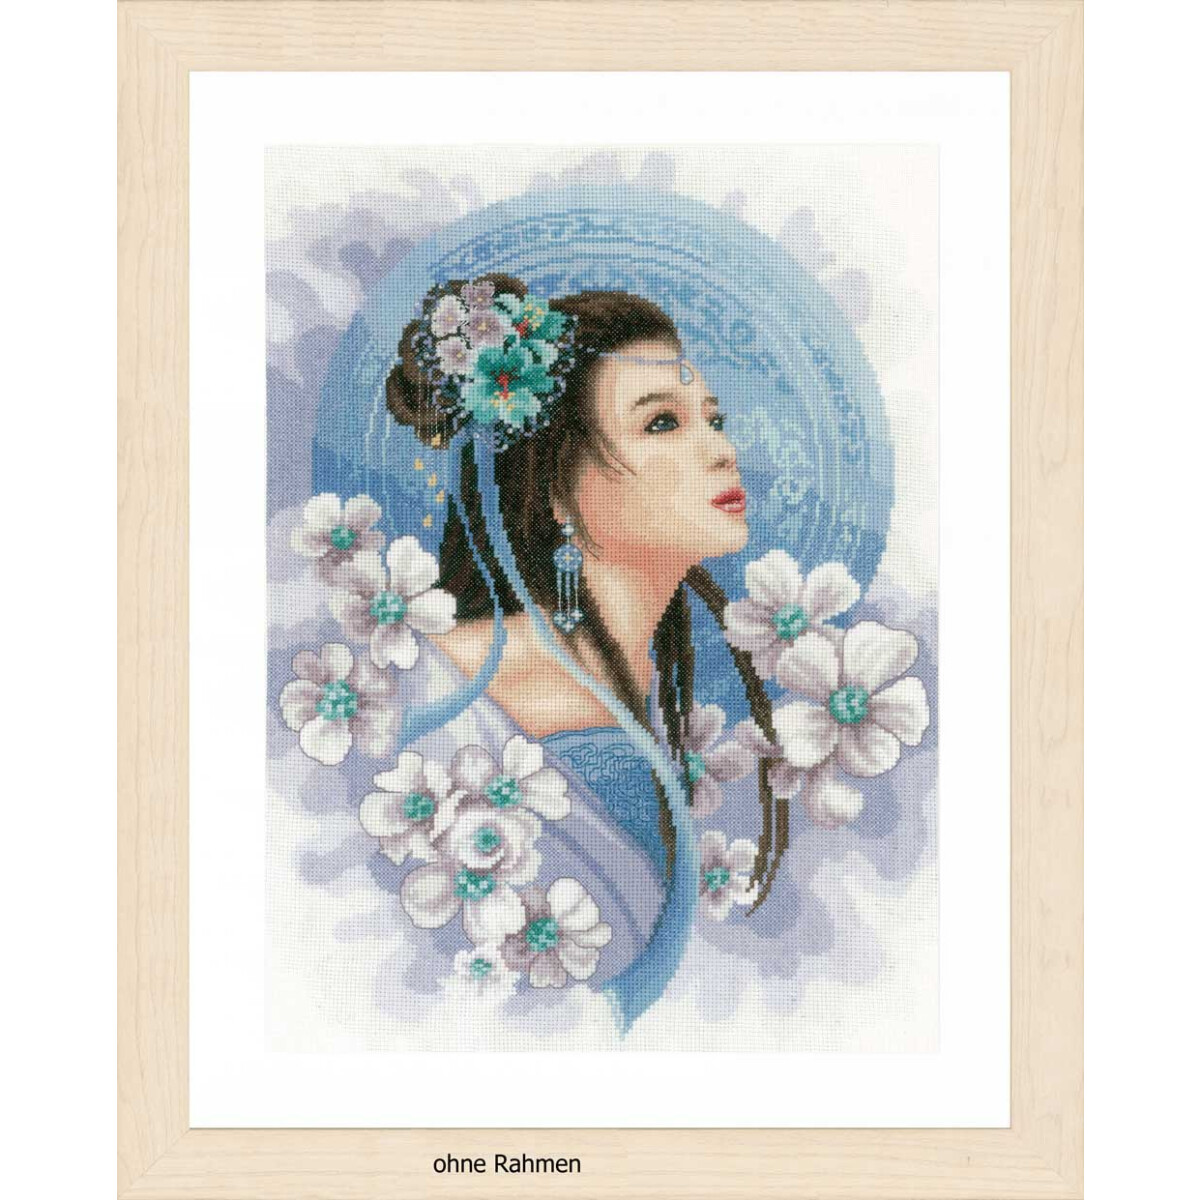 A framed work of art shows a woman with long, flowing...